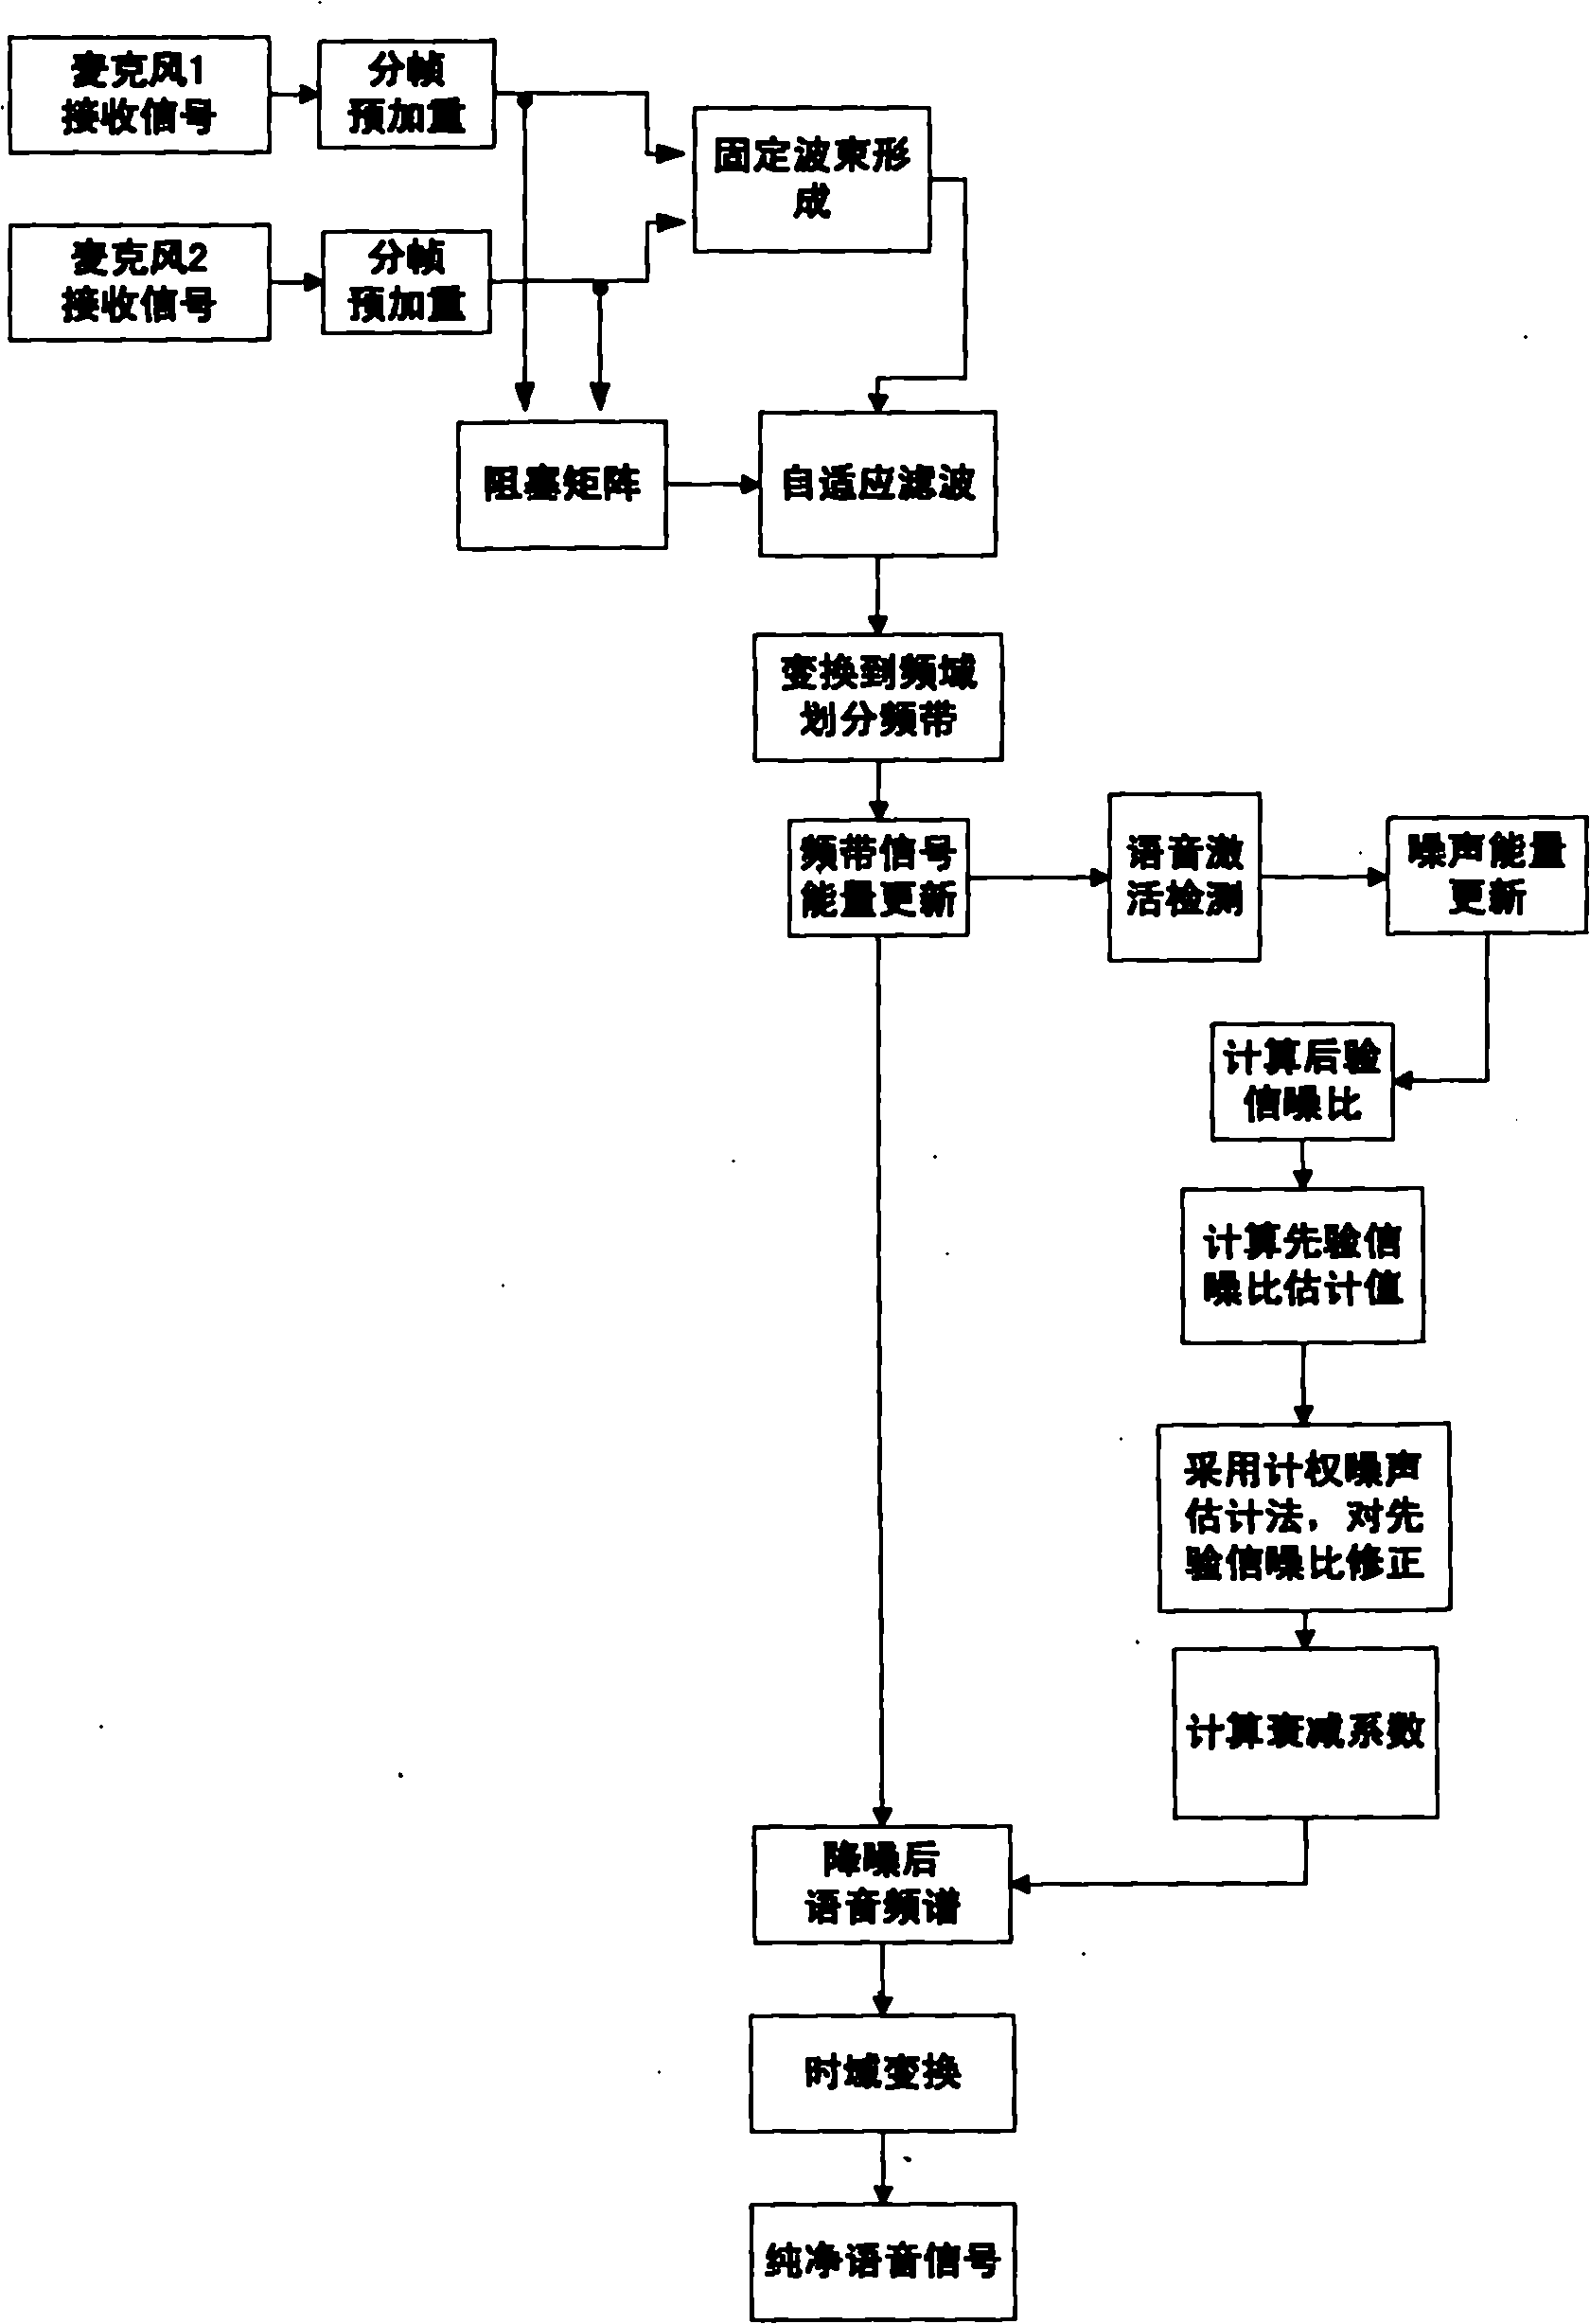 Dual-microphone-based speech enhancement device and method